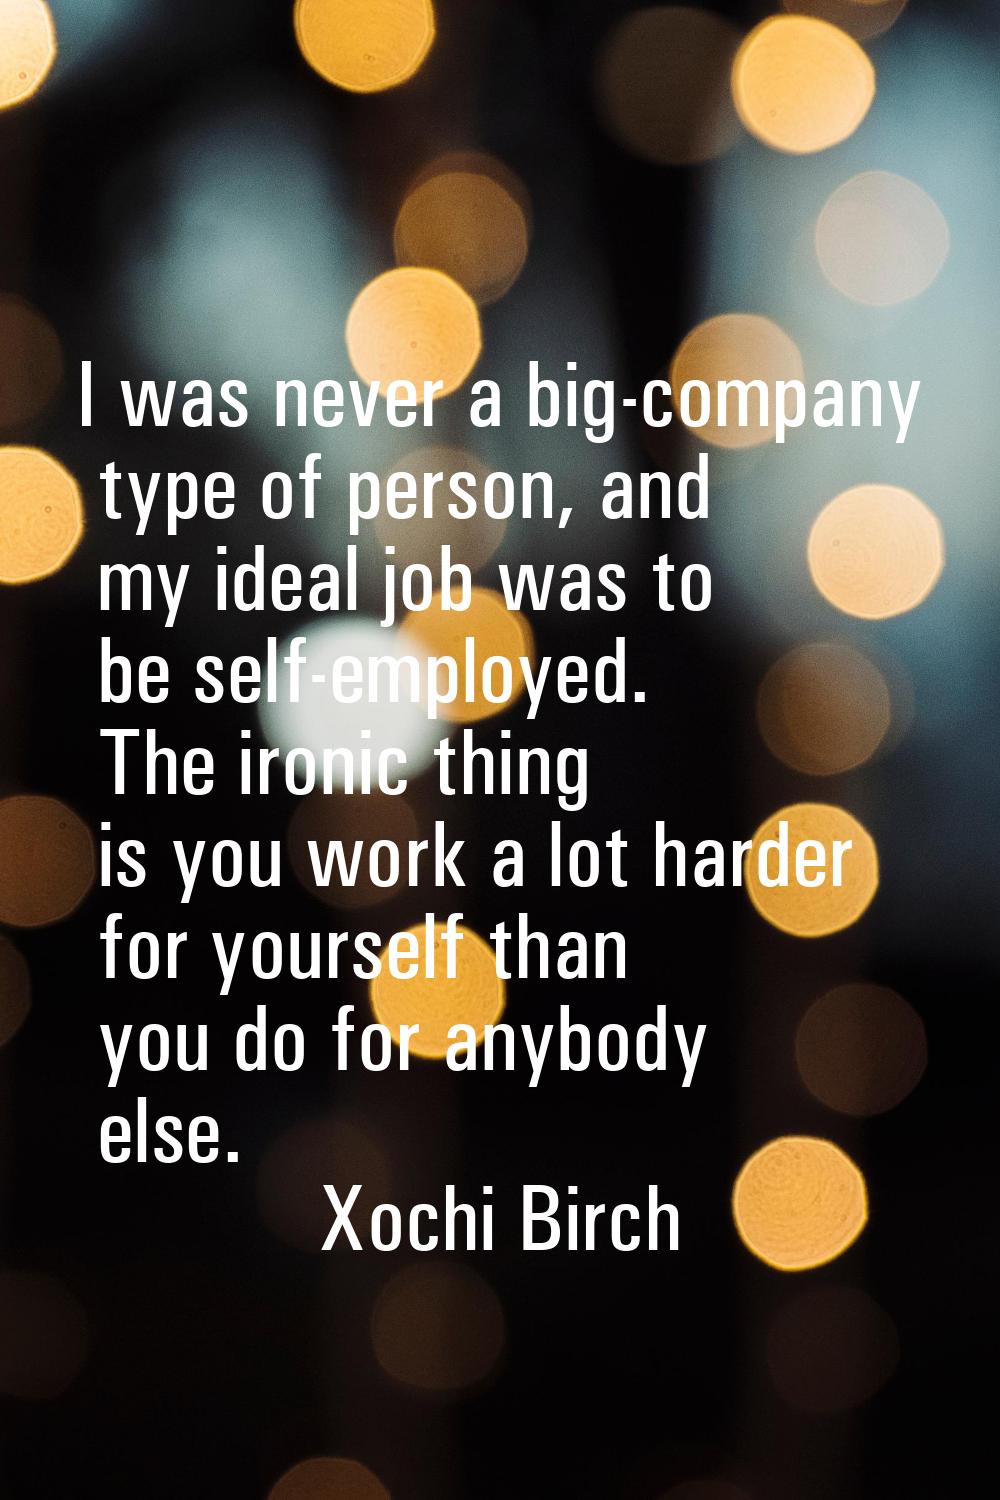 I was never a big-company type of person, and my ideal job was to be self-employed. The ironic thin